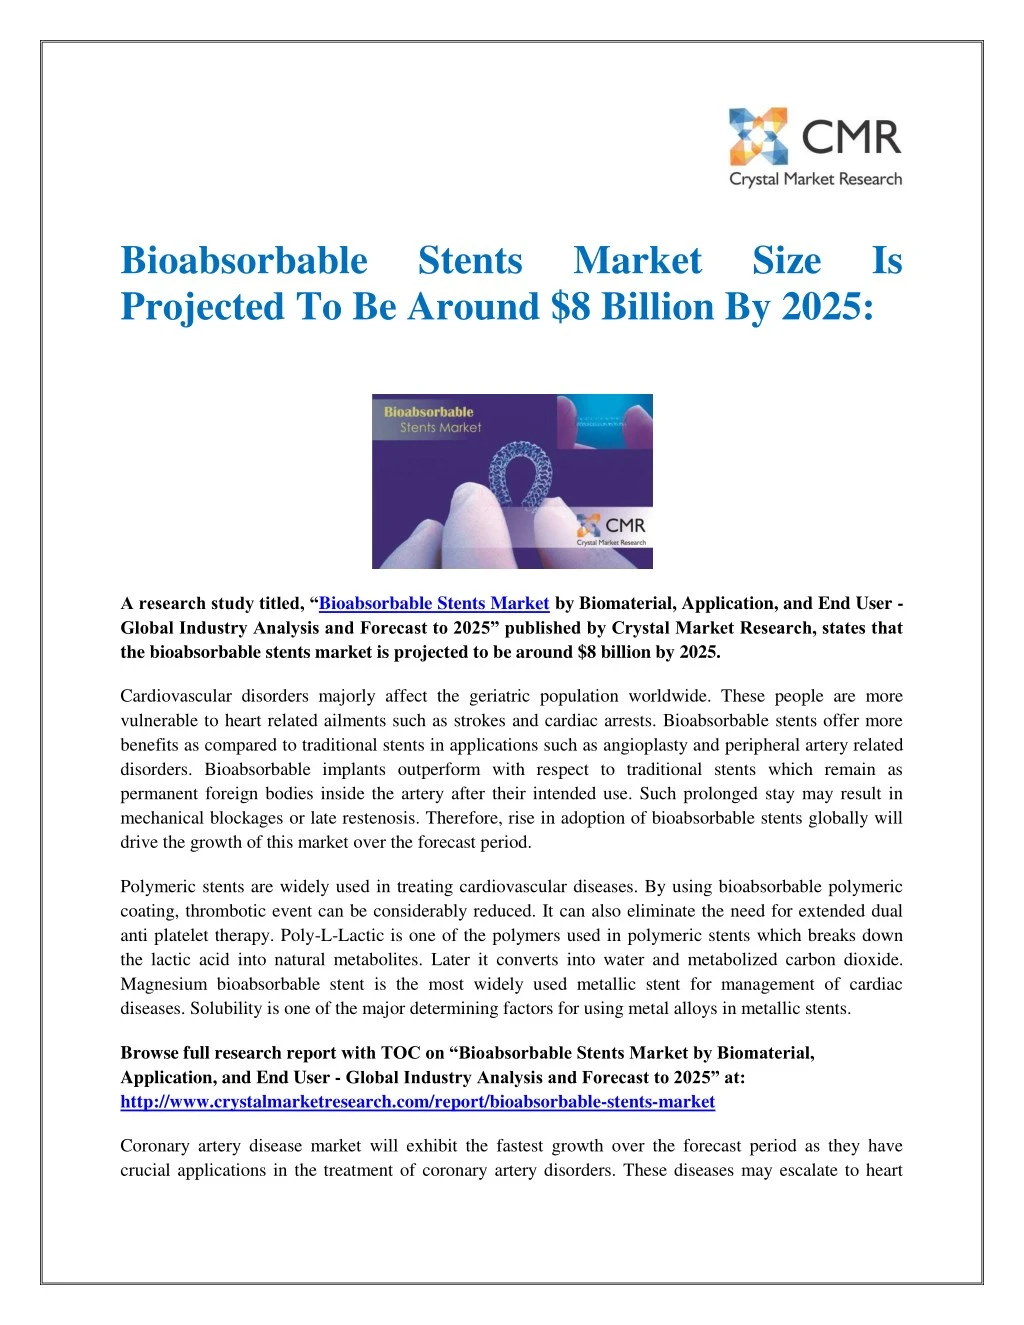 bioabsorbable projected to be around 8 billion